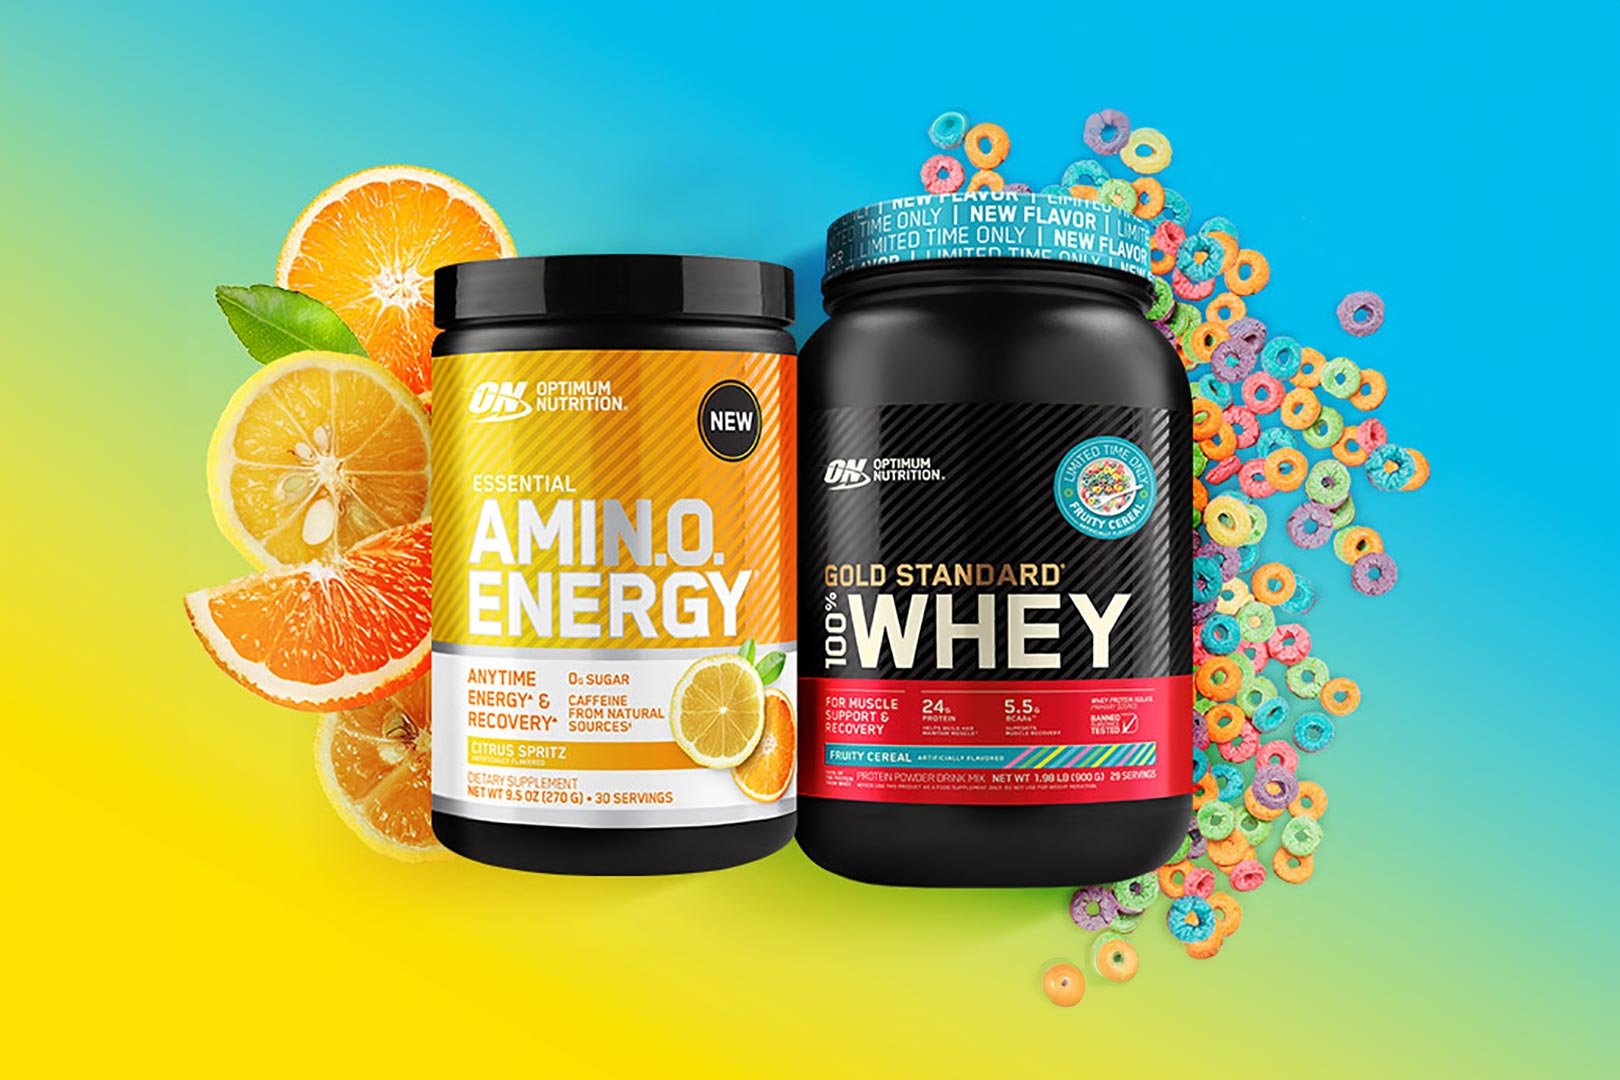 Optimum Nutrition Fruity Cereal Gold Standard Whey And Citrus Spritz Amino Energy